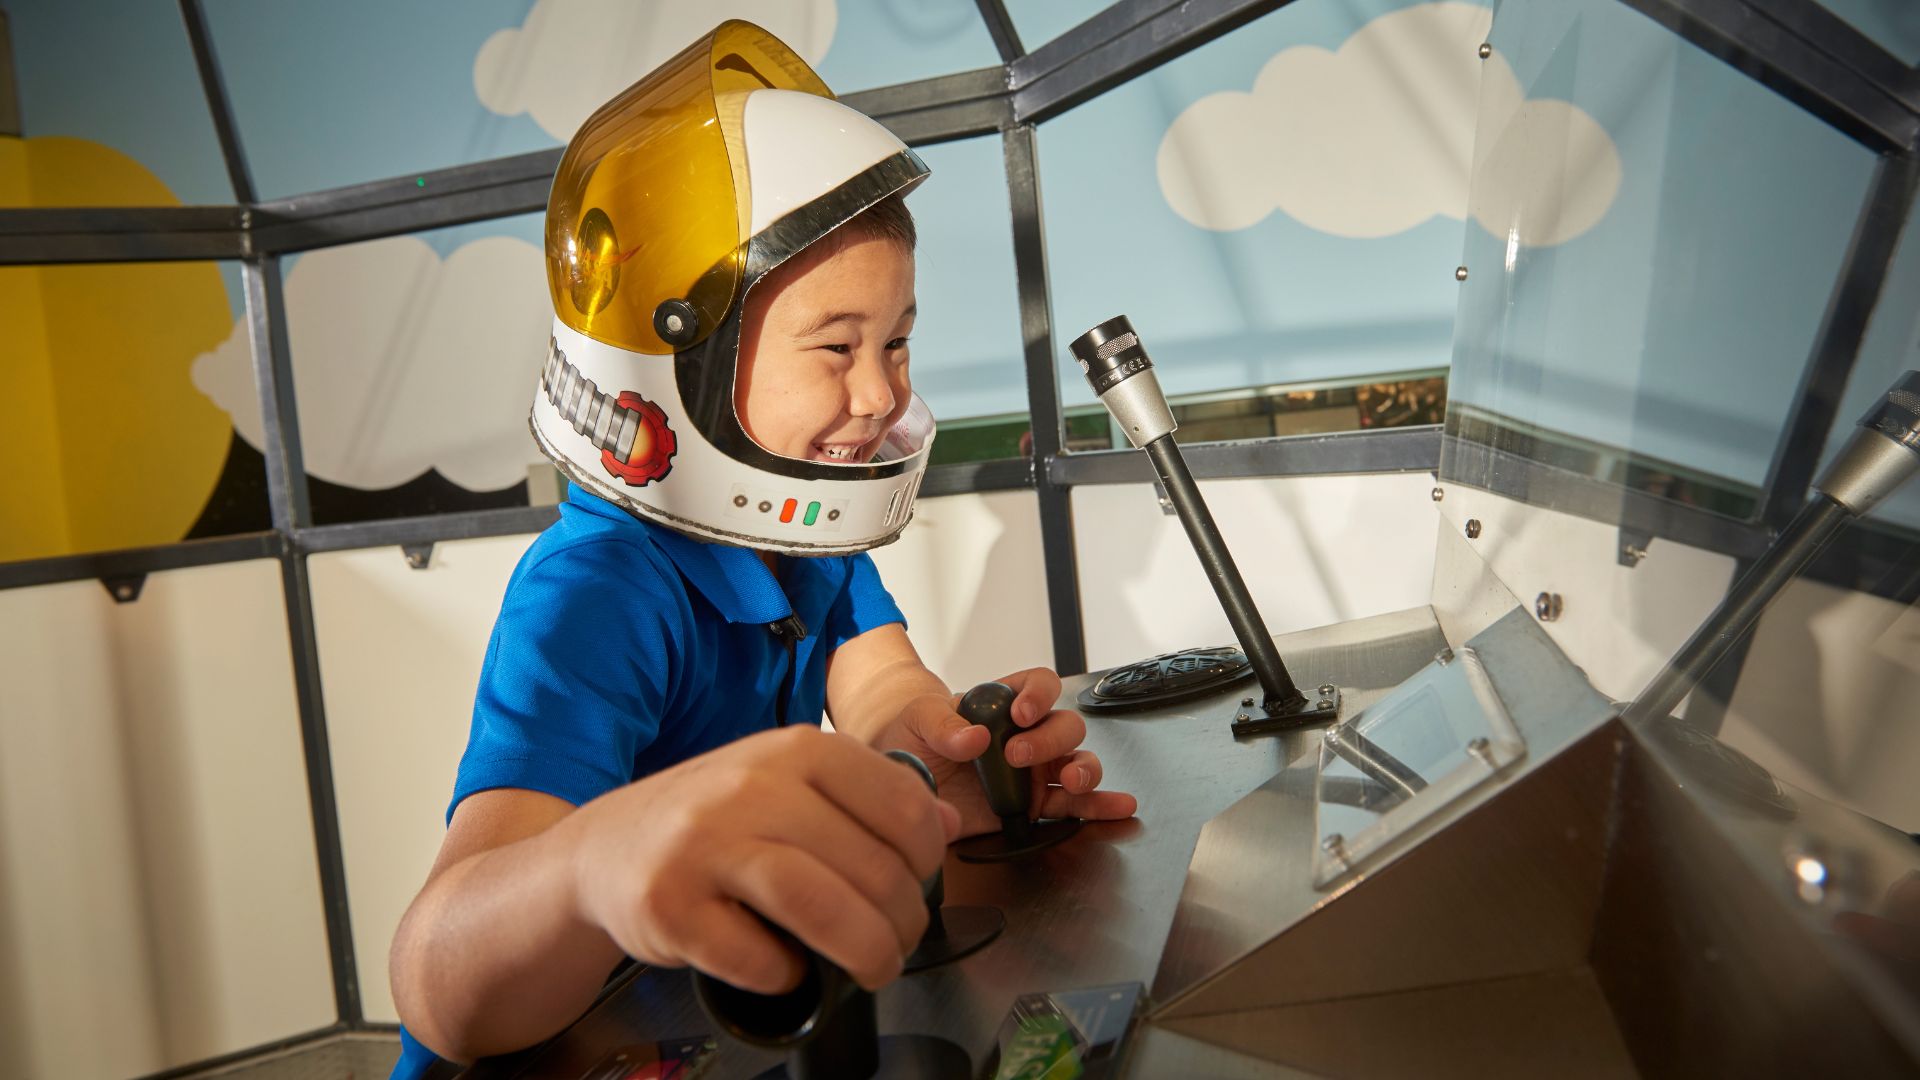 A young boy pretends to be an astronaut at the Saint Louis Science Center.